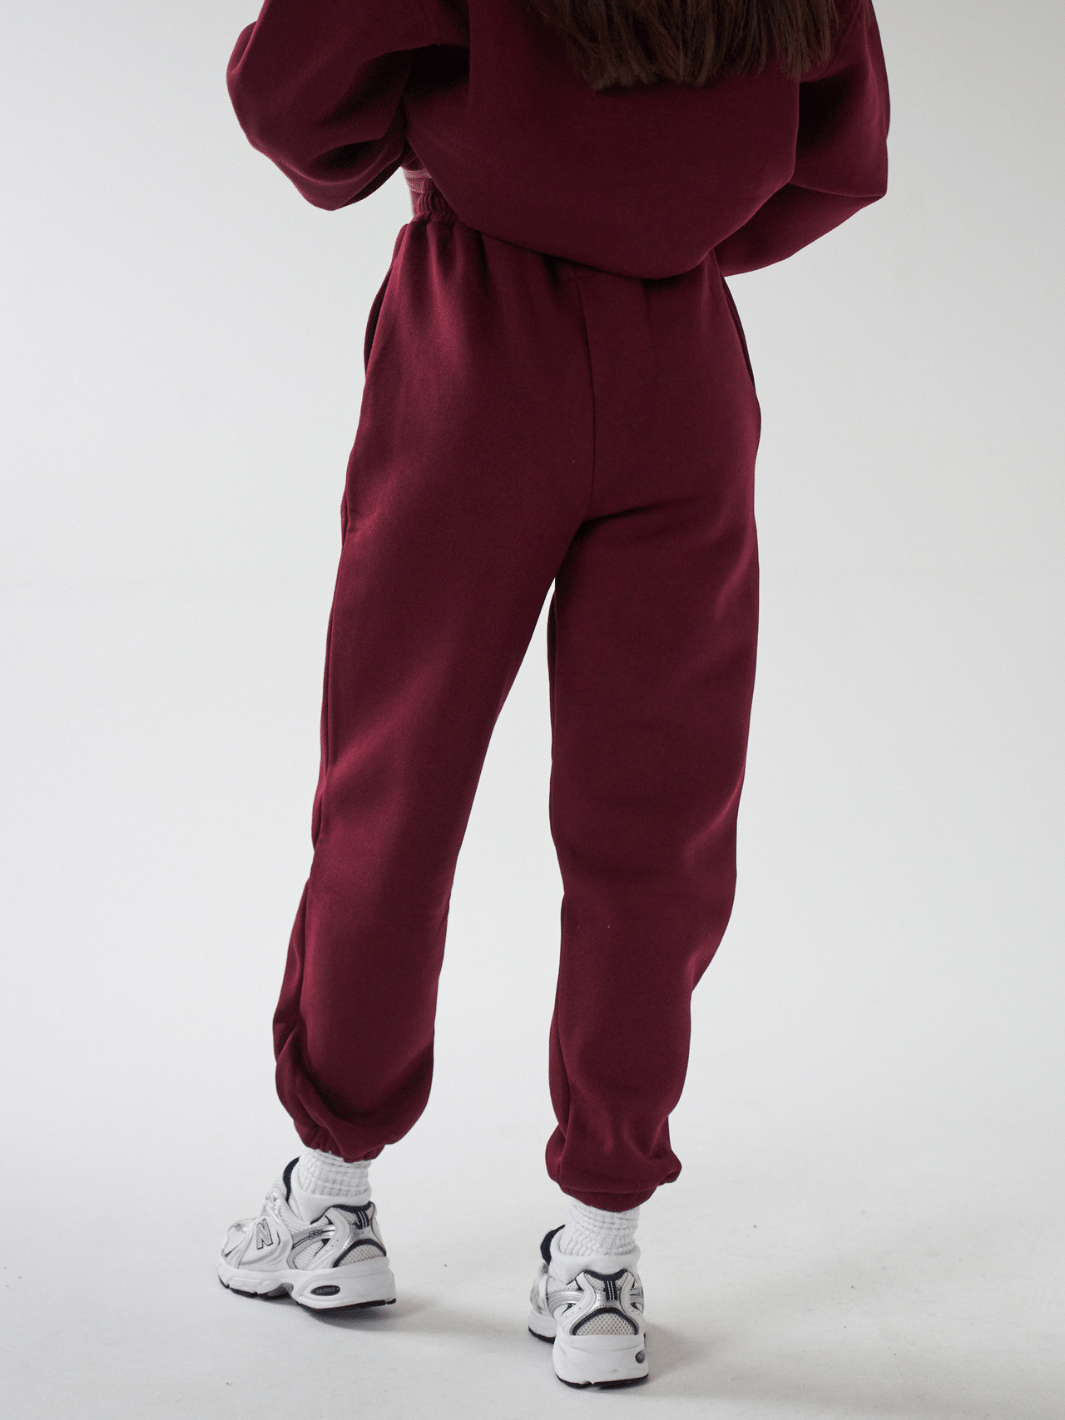 Sian Marie lounge Baggy SNME Retro Joggers - Burgundy